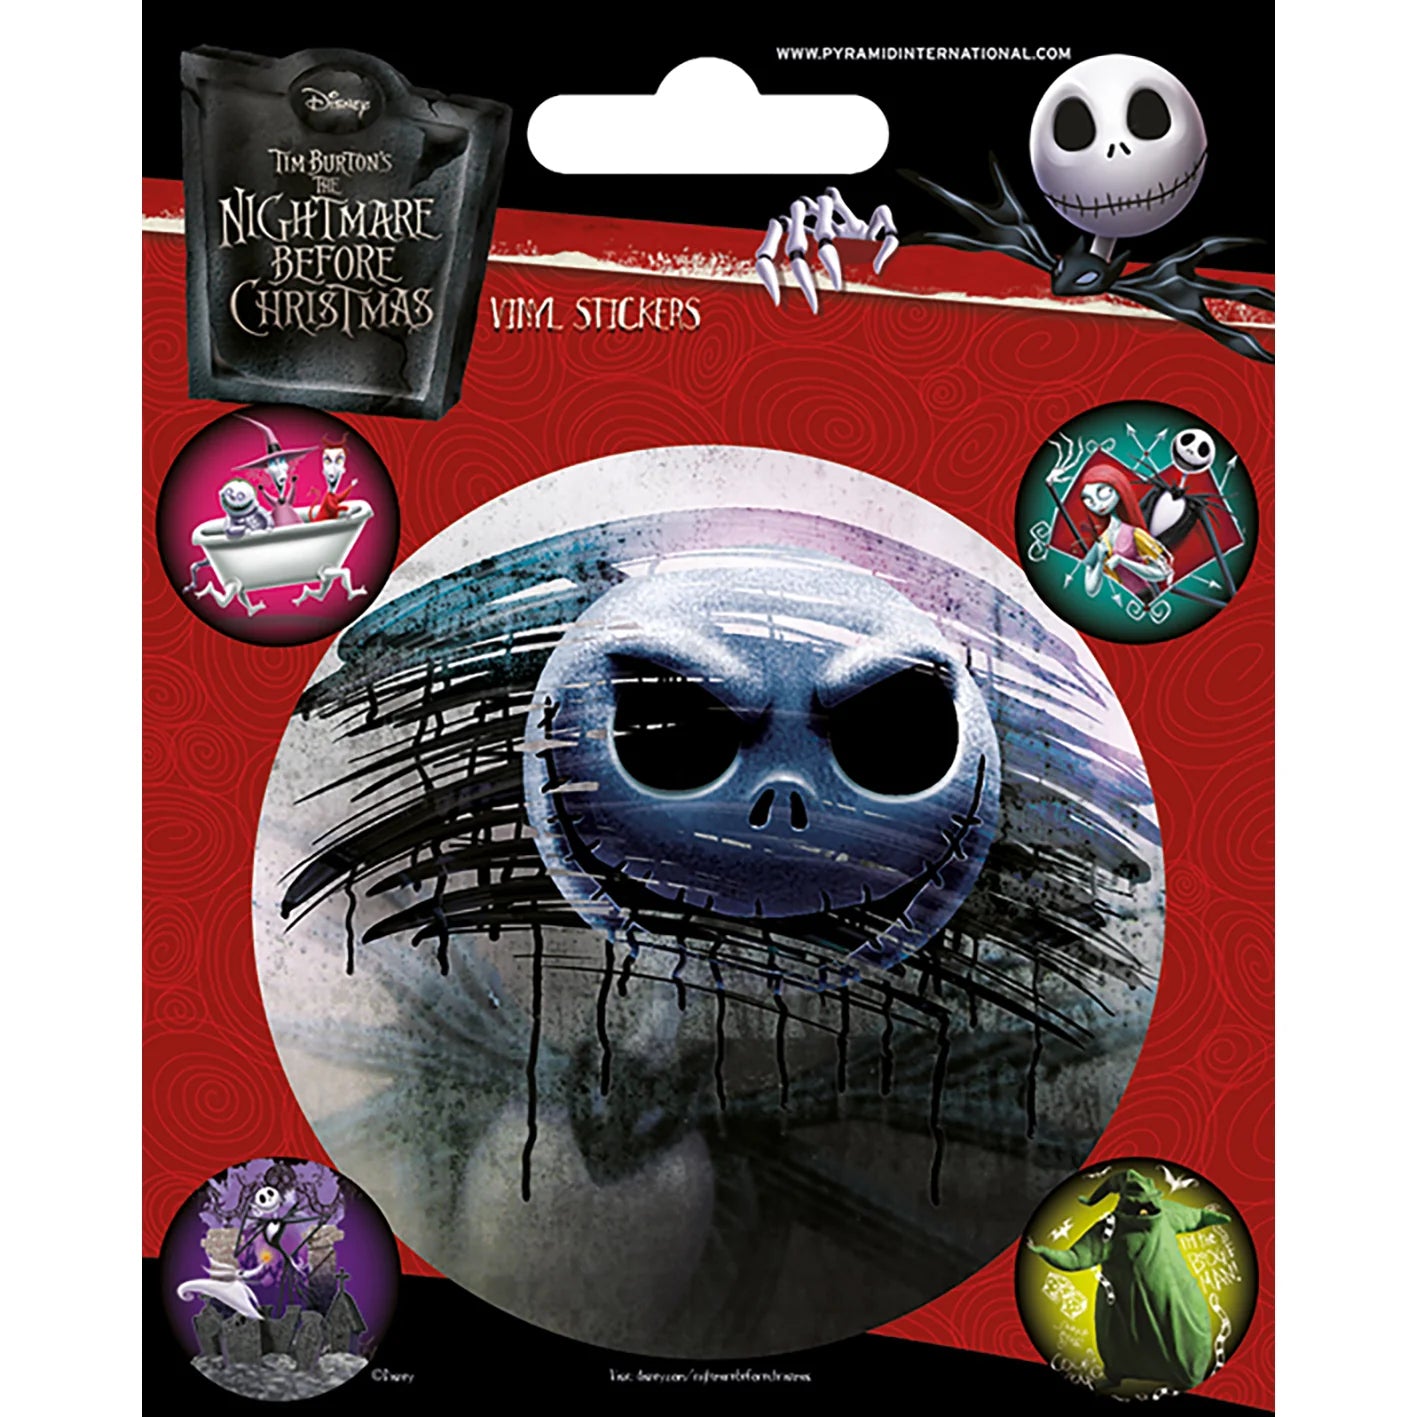 The Nightmare Before Christmas (Characters) - Vinyl Sticker Set